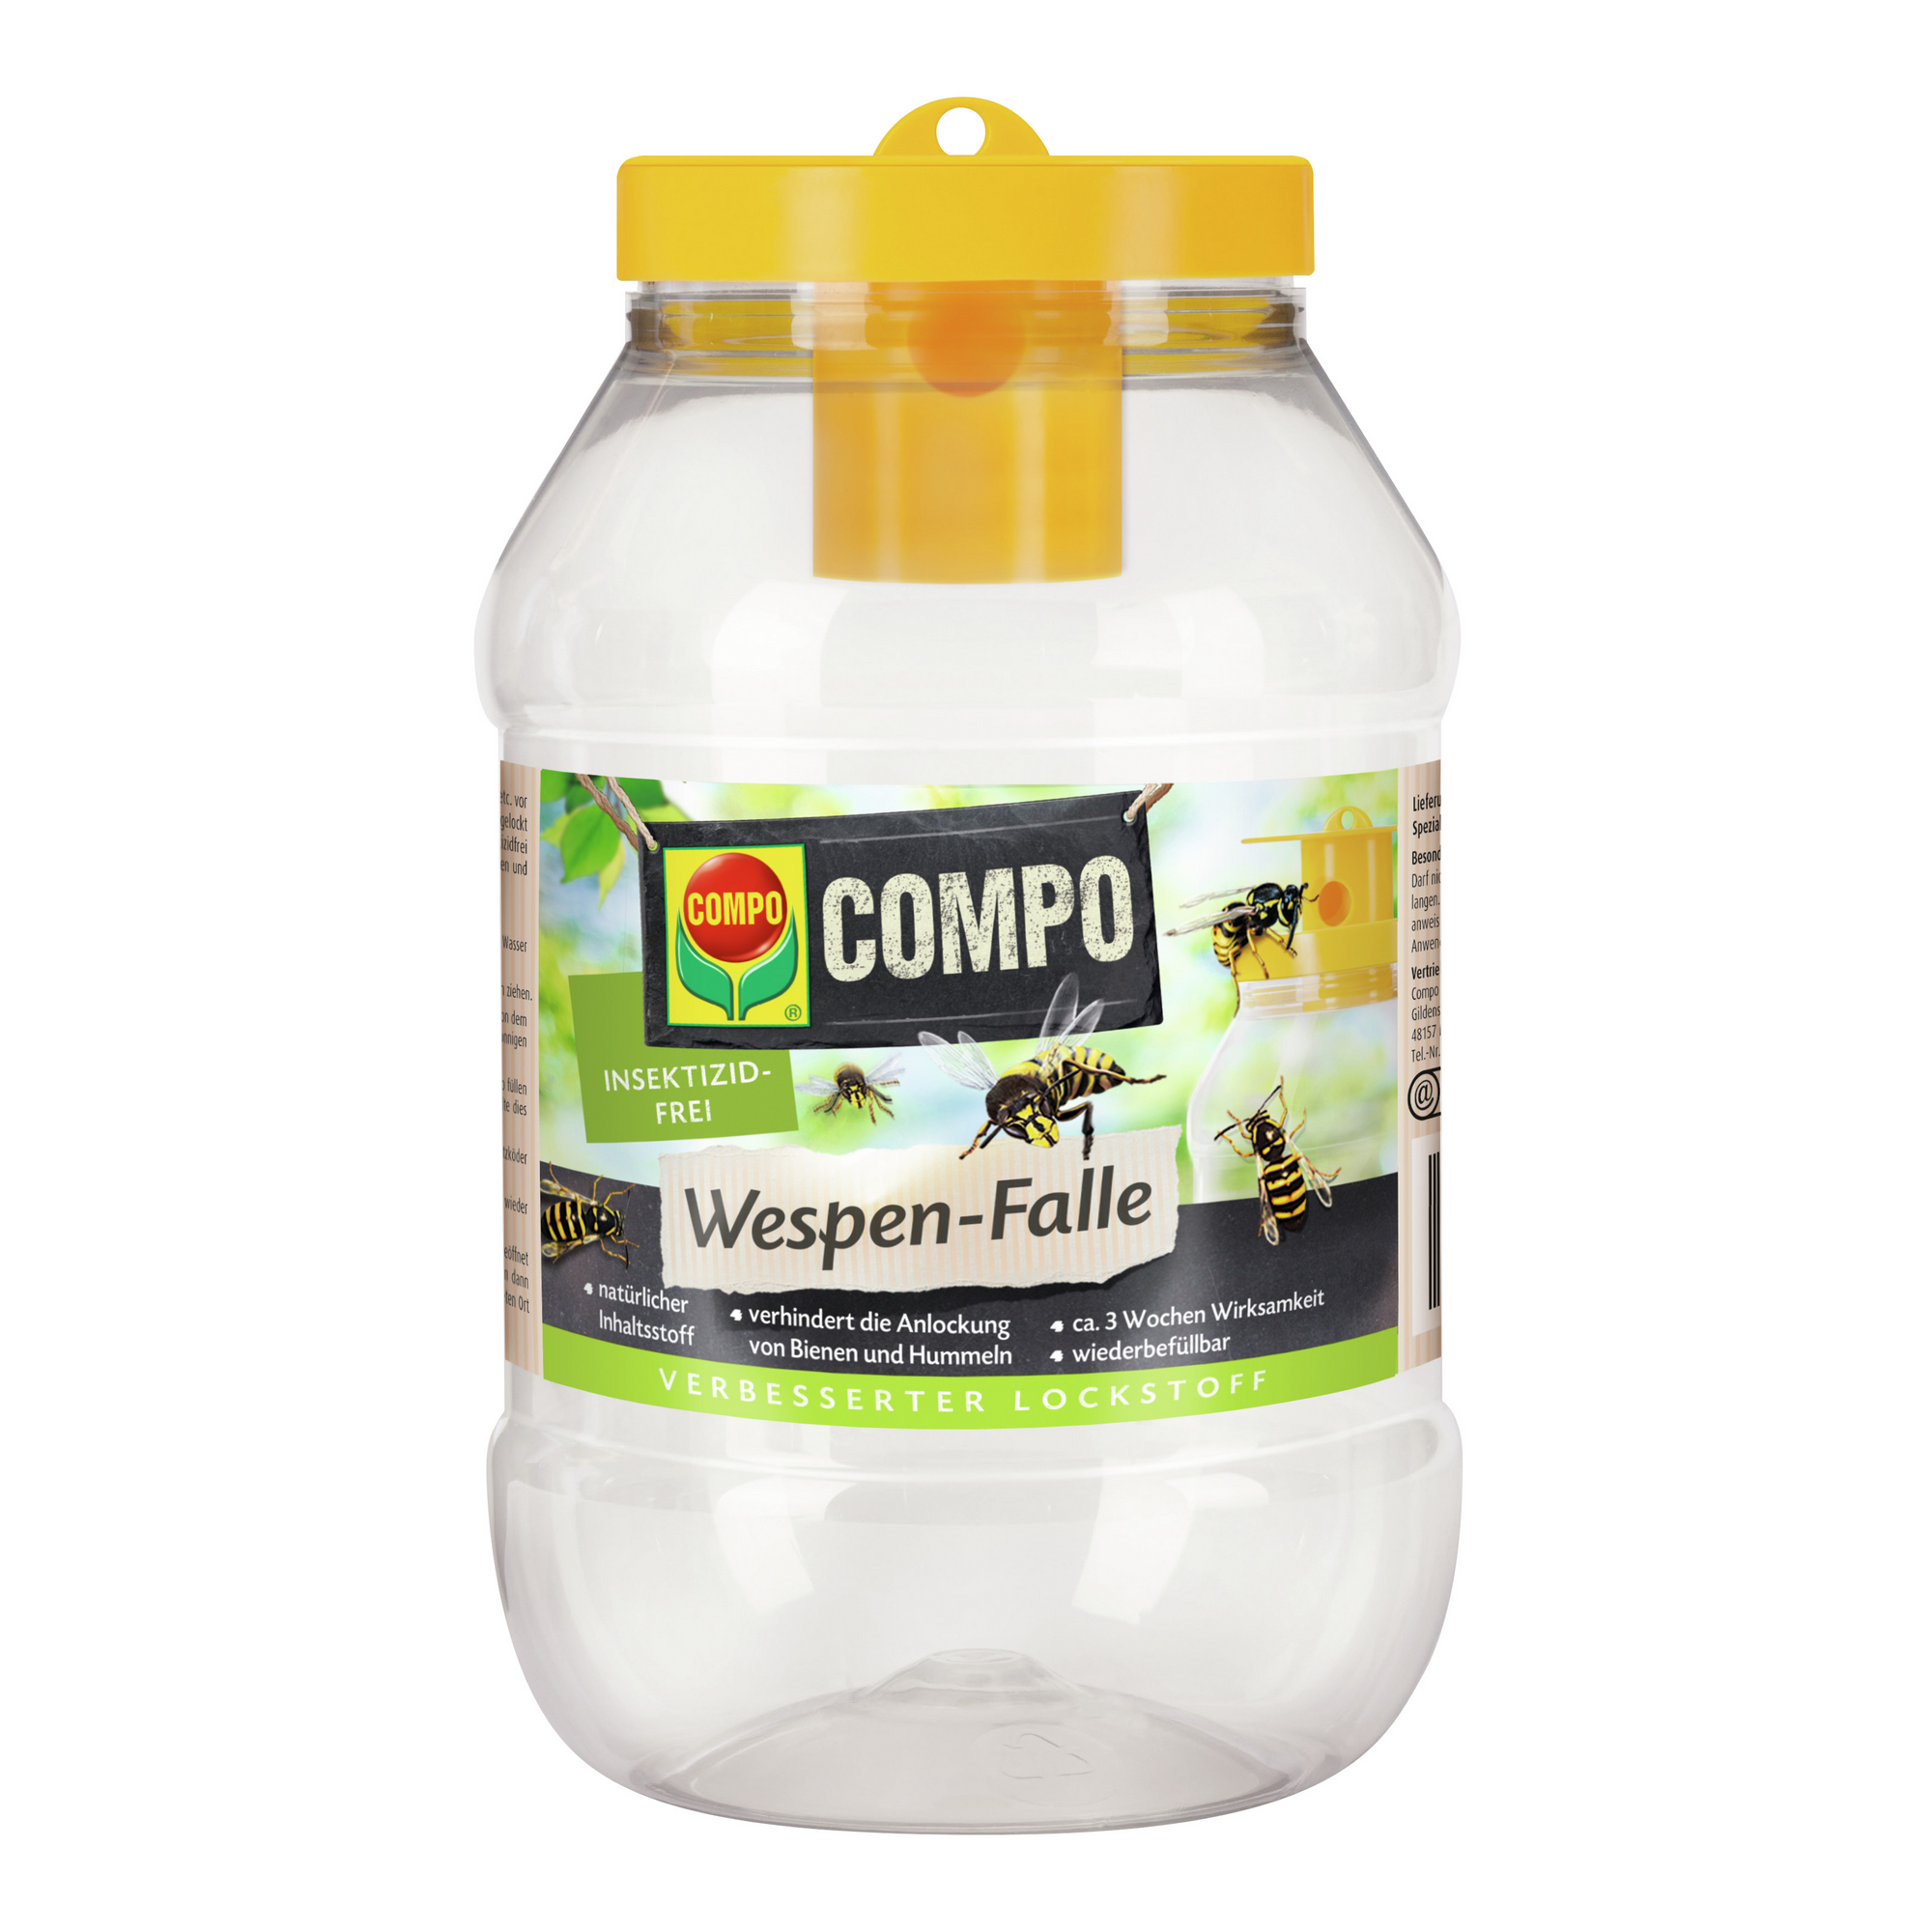 Wespen-Falle N + product picture